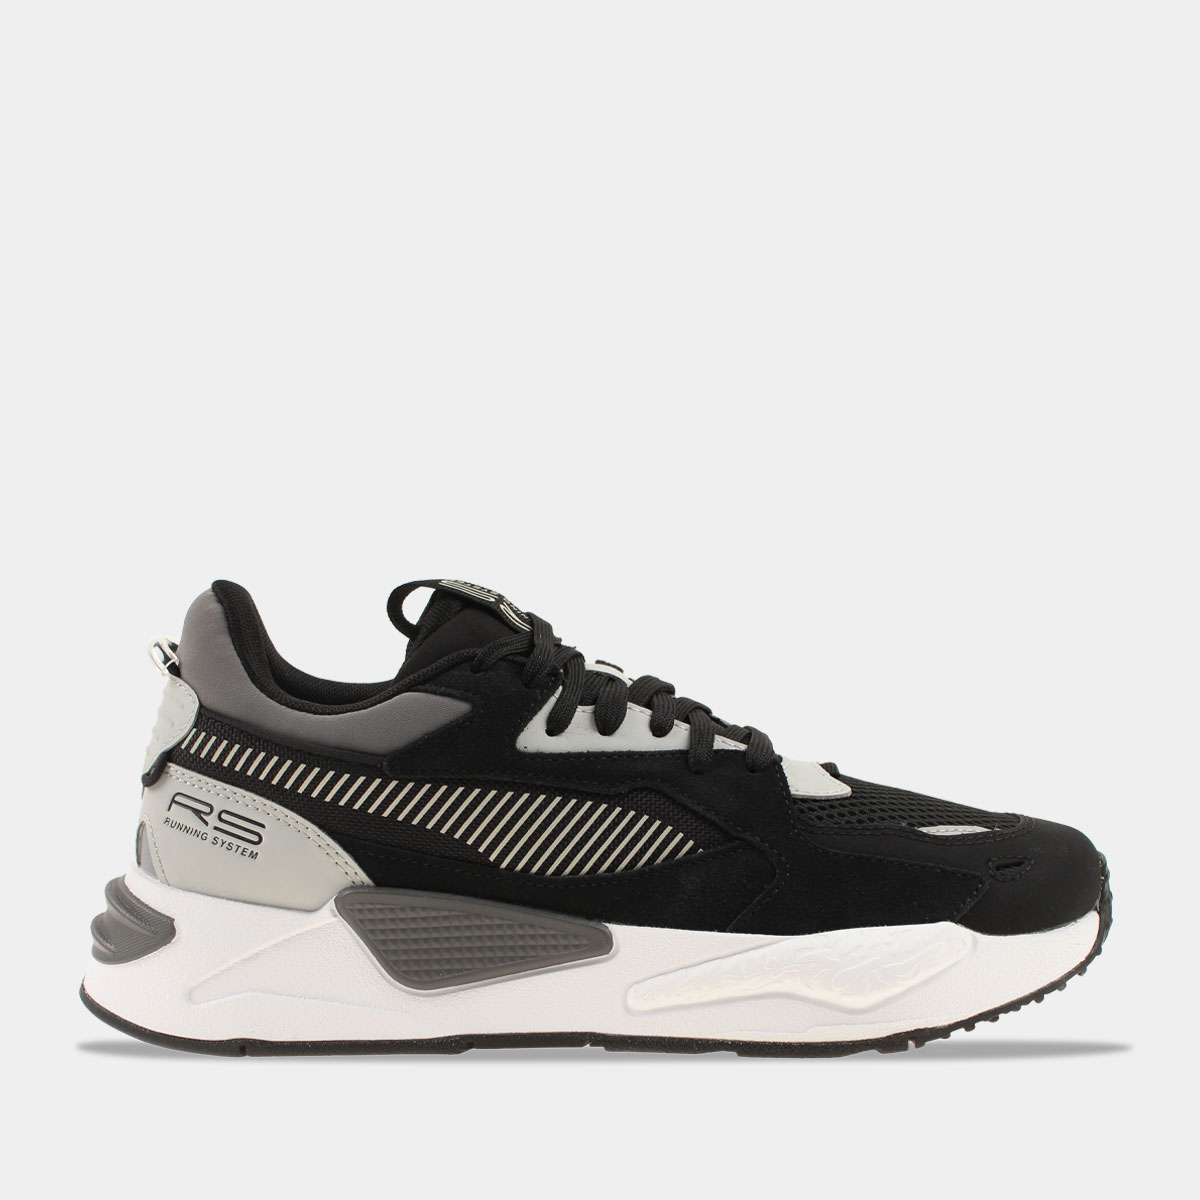 Puma RS-Z Reinvention Black/White heren sneakers